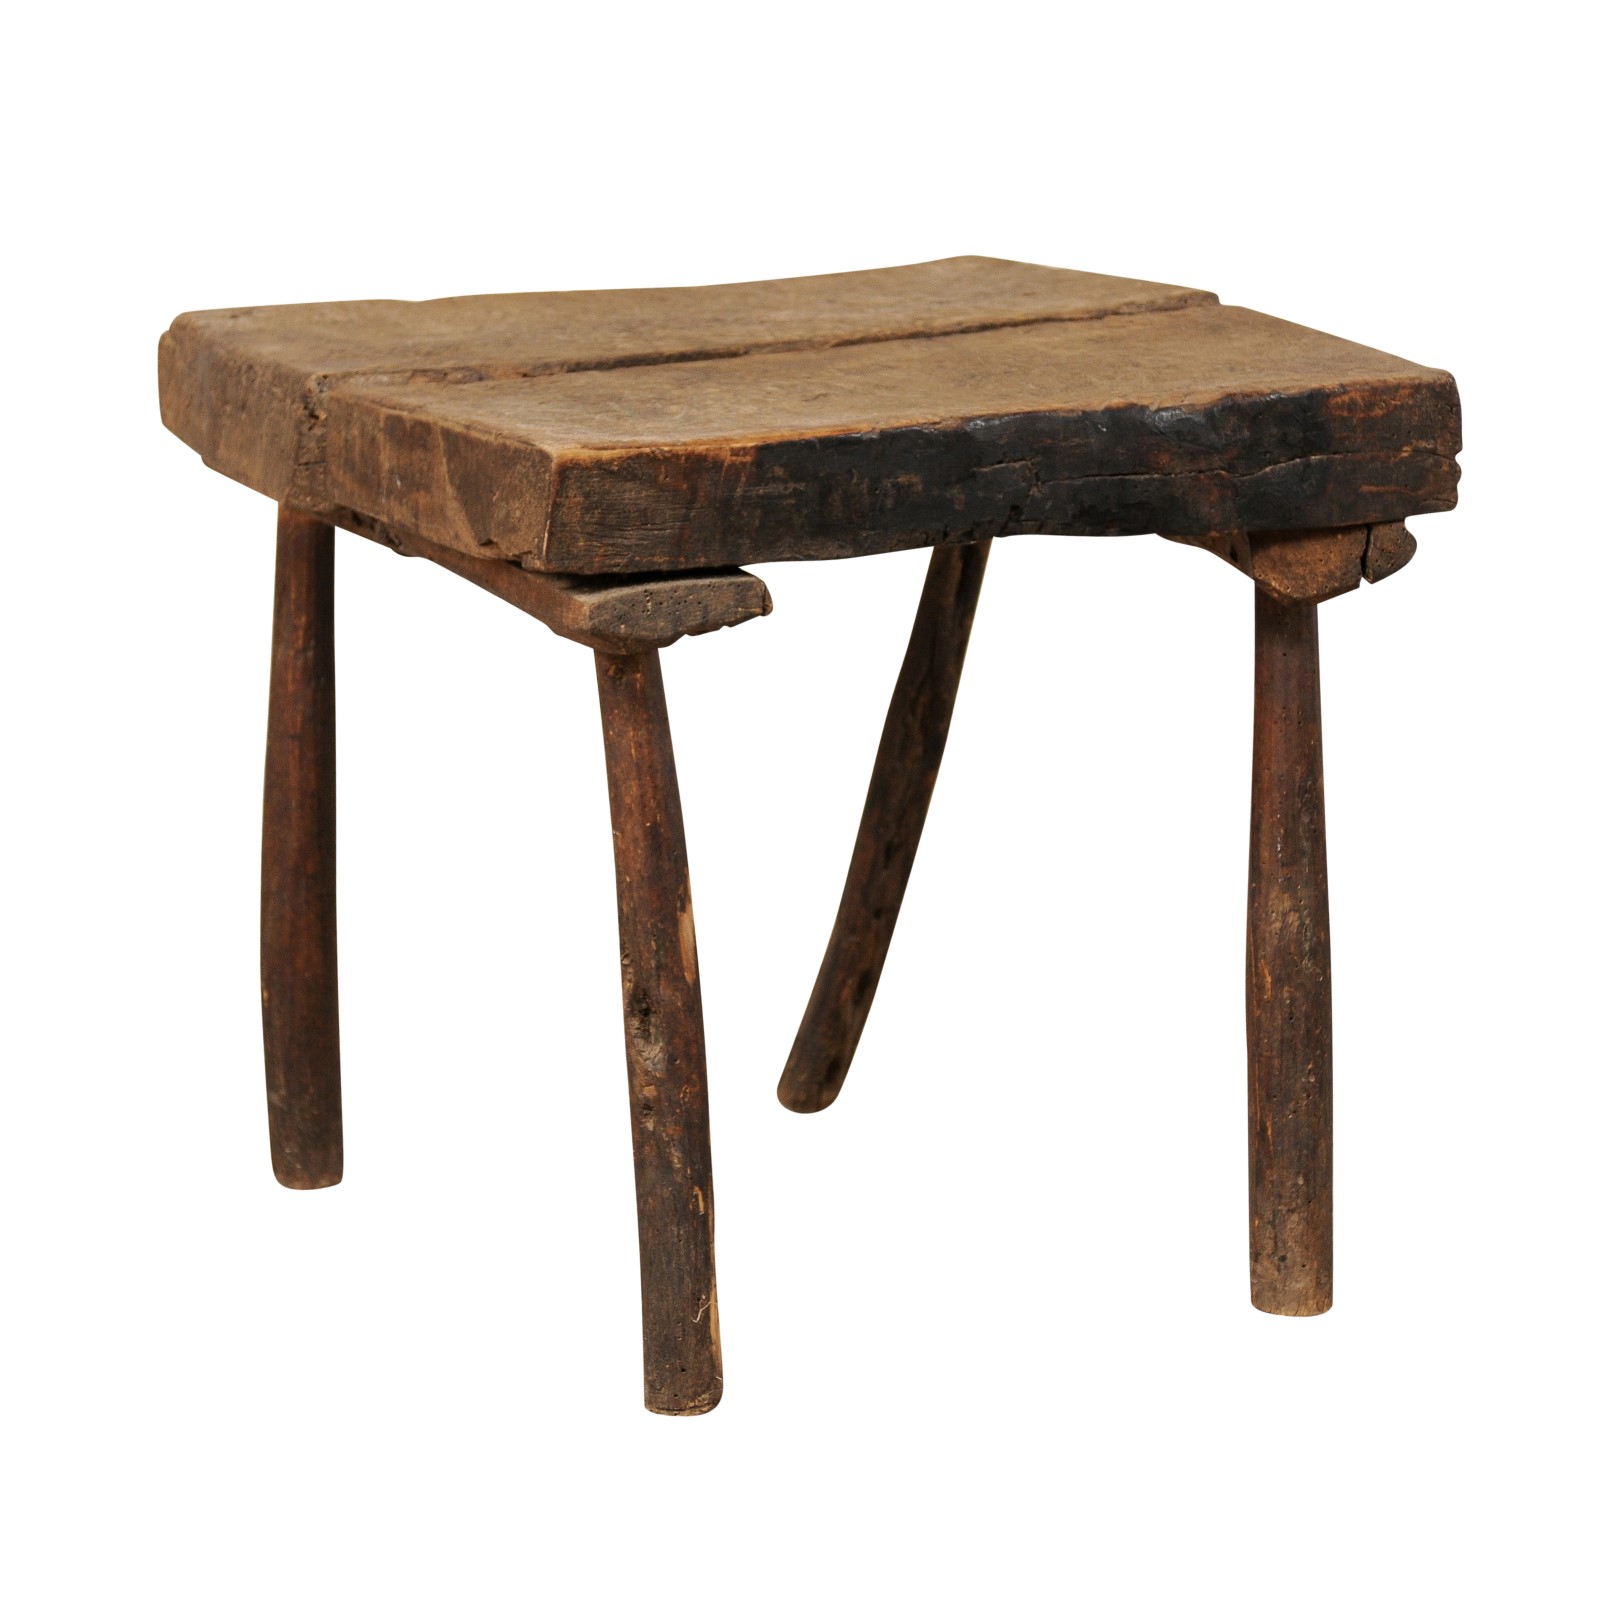 Rustic French Antique Wooden Side Table